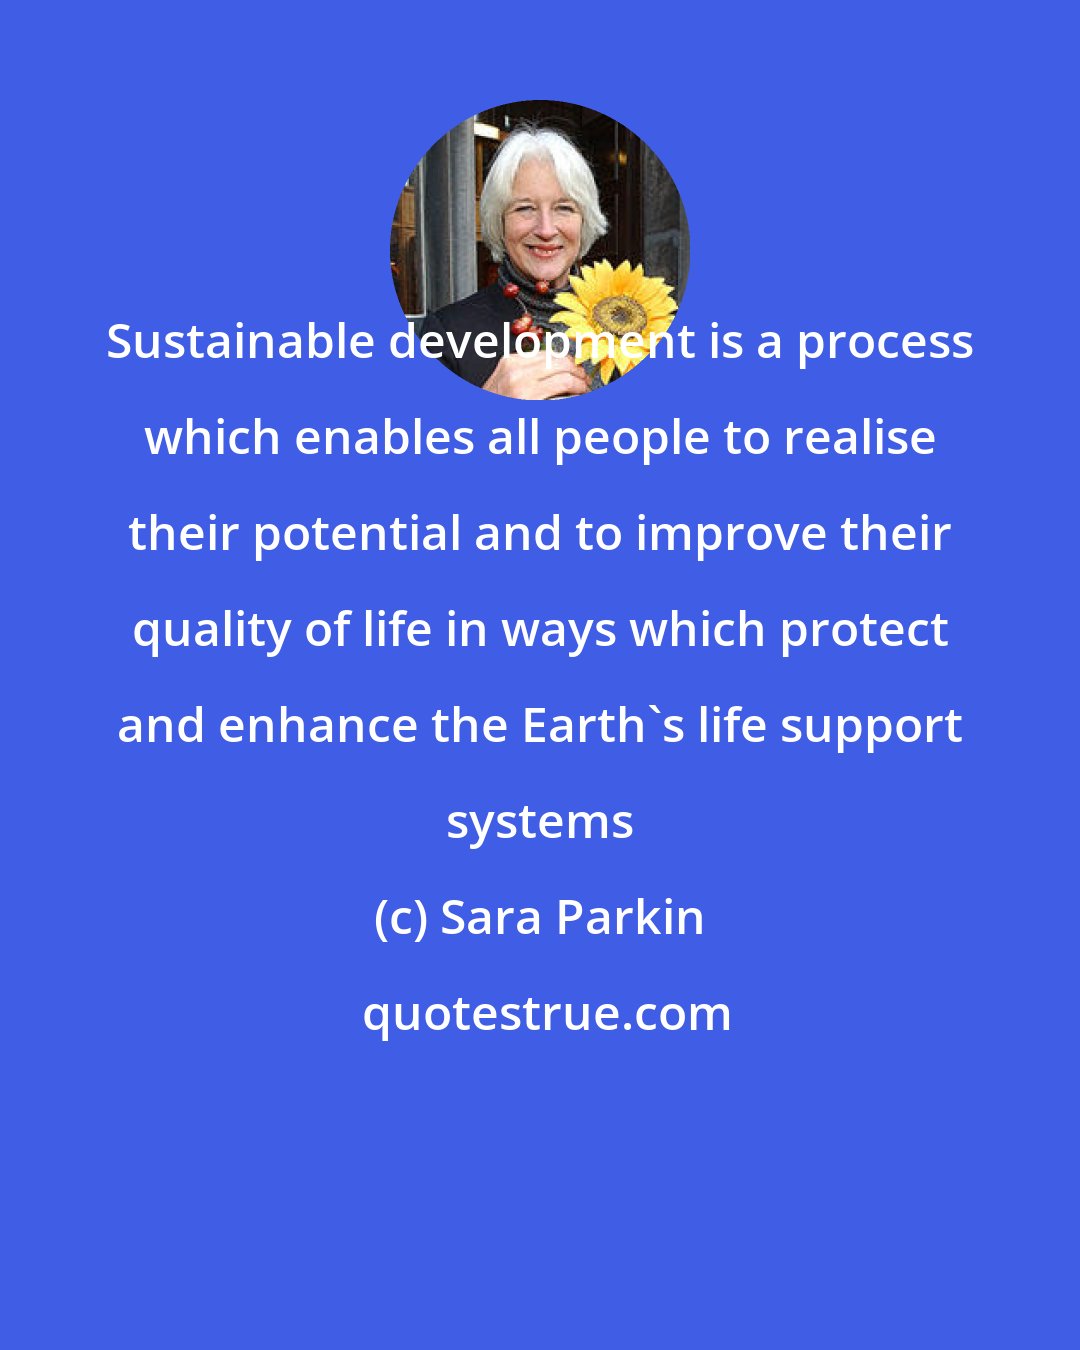 Sara Parkin: Sustainable development is a process which enables all people to realise their potential and to improve their quality of life in ways which protect and enhance the Earth's life support systems